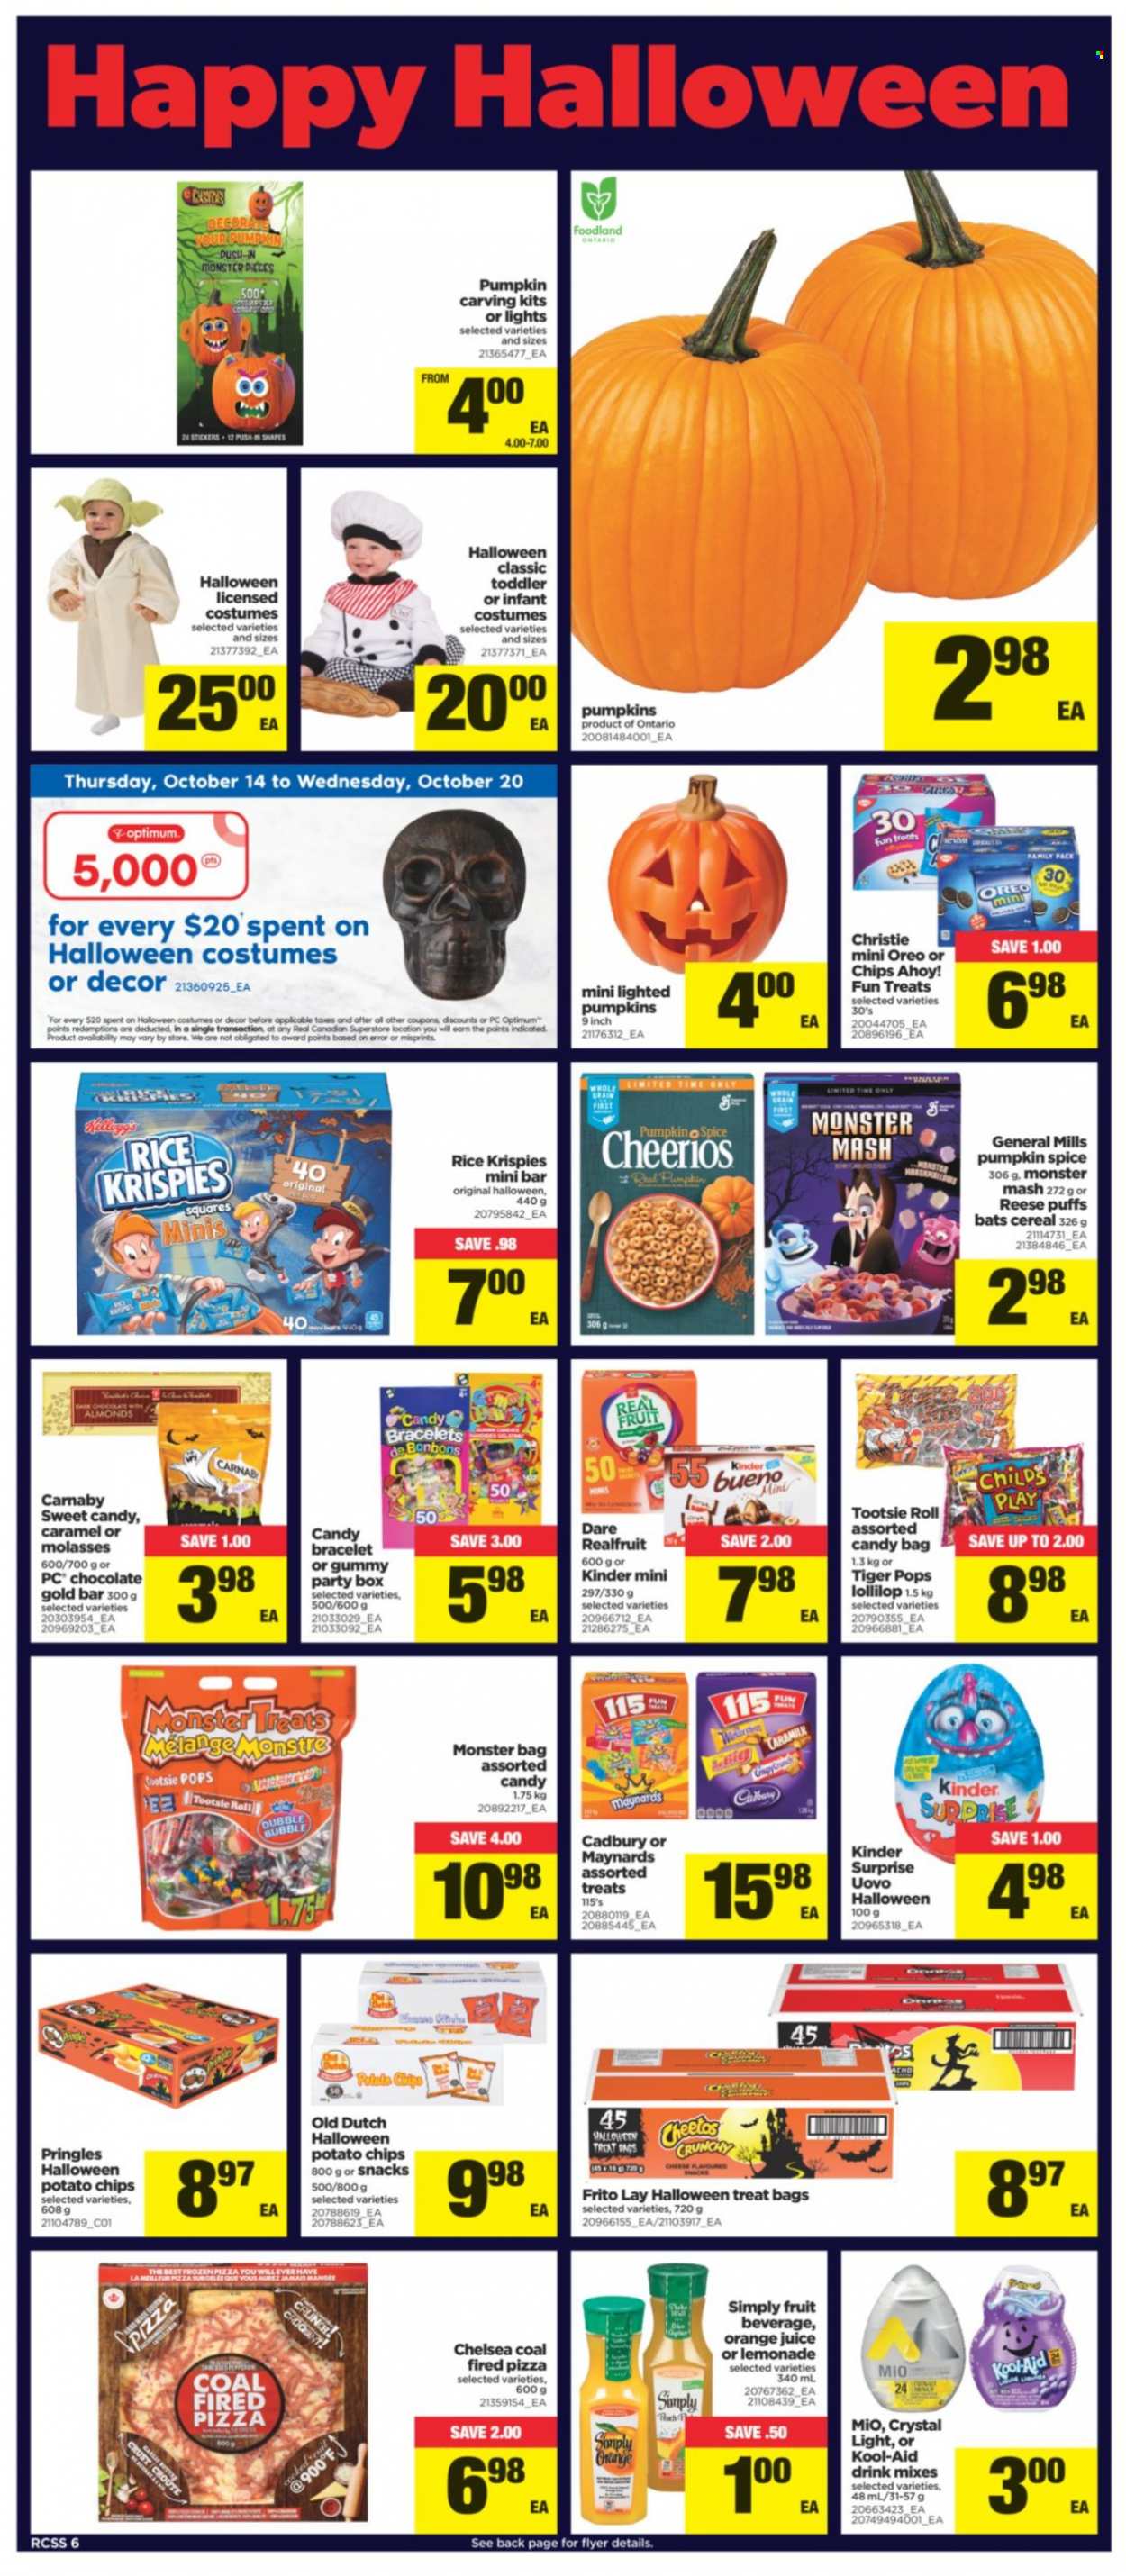 thumbnail - Real Canadian Superstore Flyer - October 14, 2021 - October 20, 2021 - Sales products - puffs, chocolate, Kinder Surprise, Kinder Bueno, Cadbury, Chips Ahoy!, potato chips, Pringles, cereals, Cheerios, Rice Krispies, spice, molasses, almonds, lemonade, orange juice, juice, Monster, Optimum, Halloween, costume, sticker, chips. Page 6.